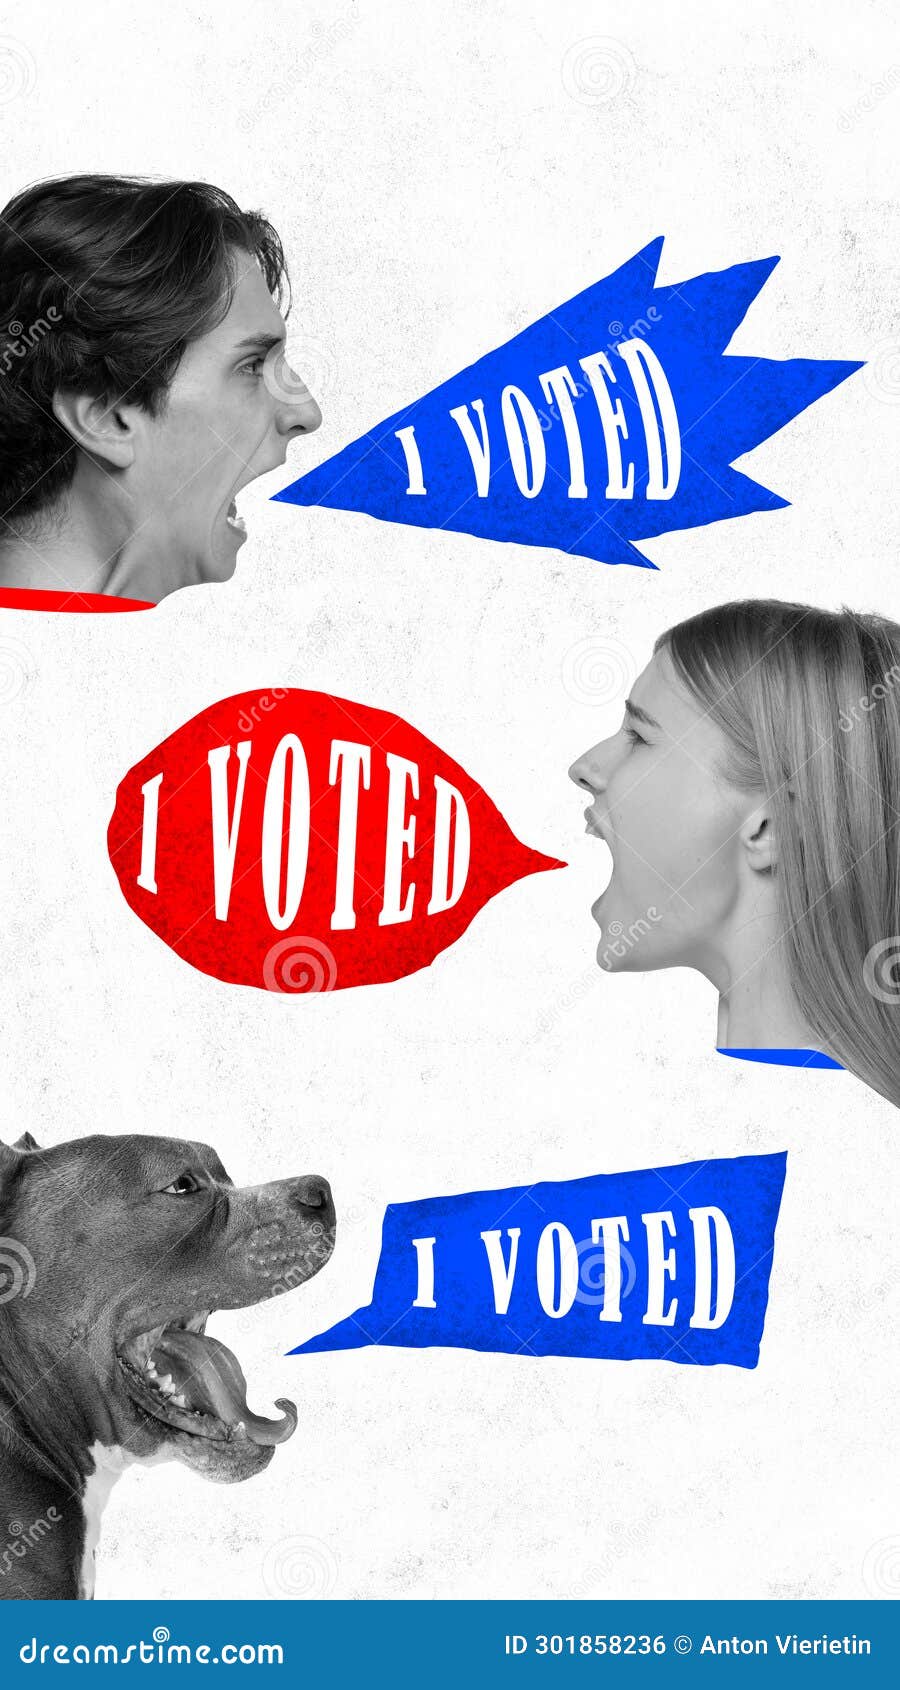 contemporary art collage. people and one dog loudly shouting in speech bubbles that they already voted. concept of